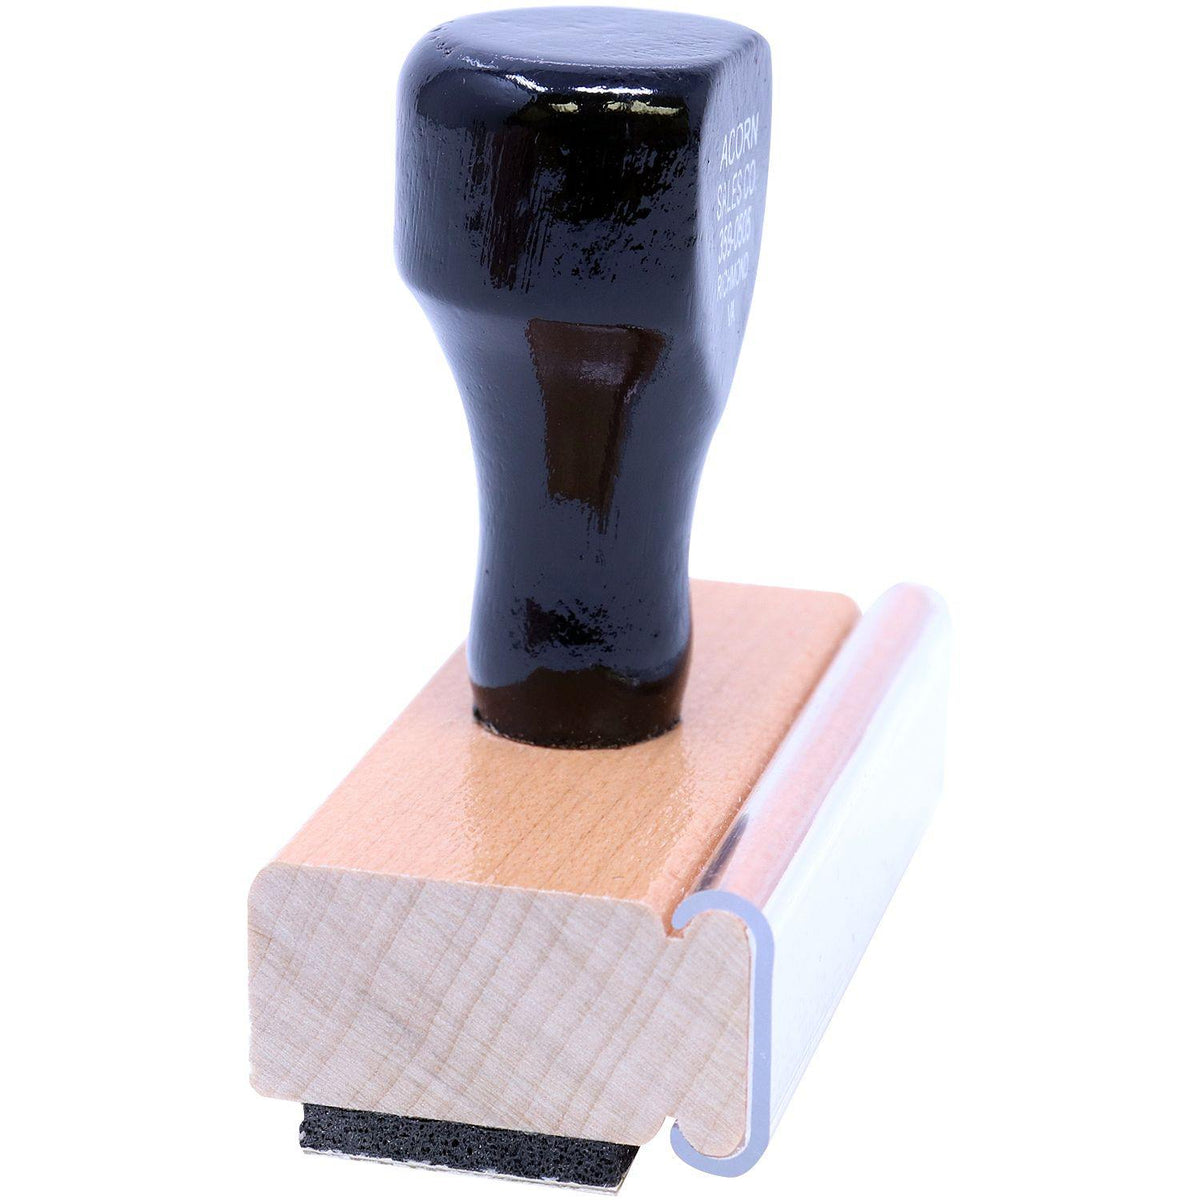 Side View of Large Personal Confidential Rubber Stamp at an Angle